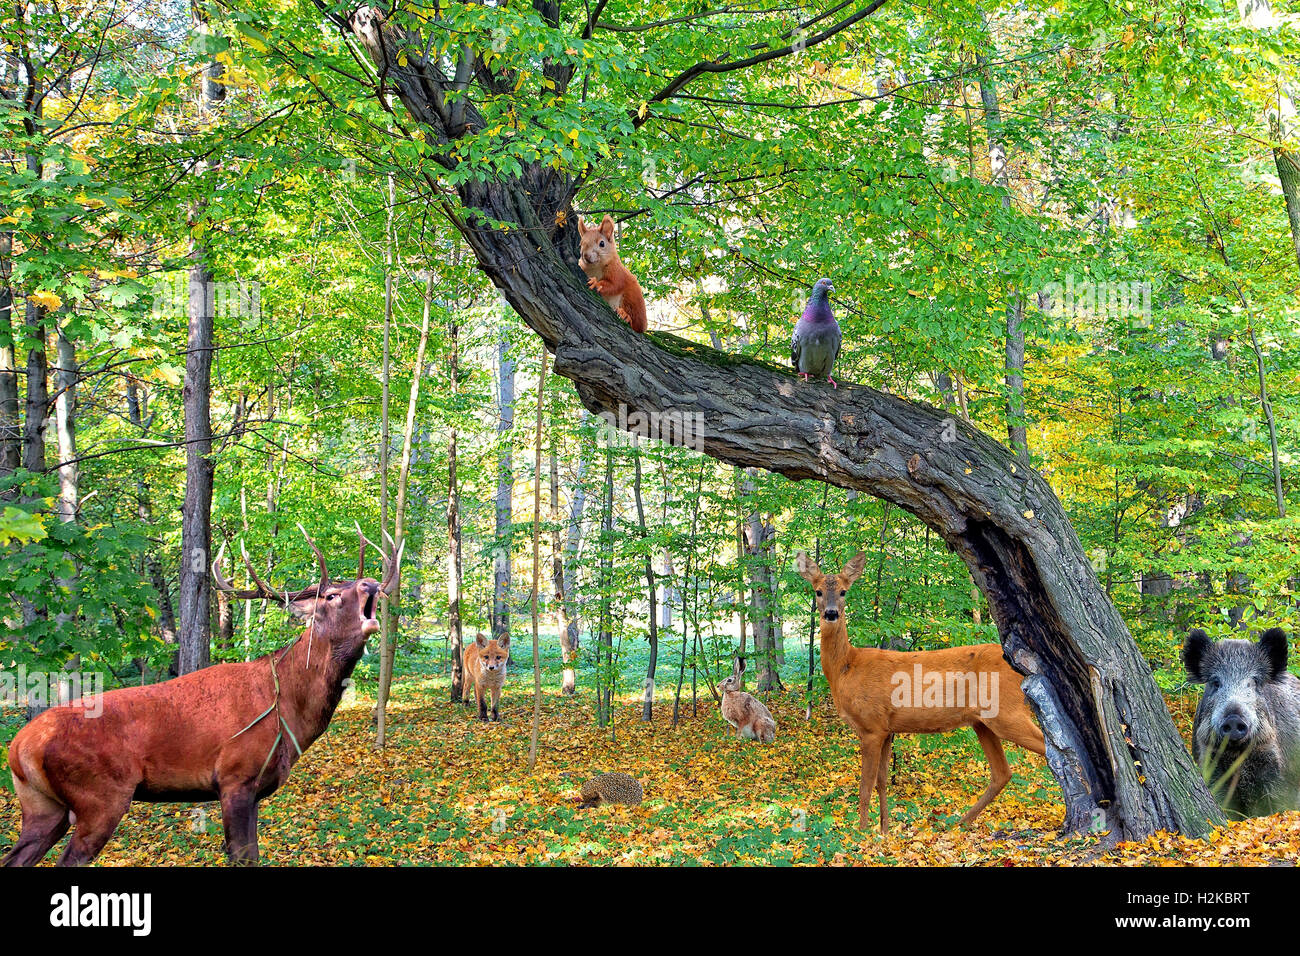 Forest full of animals Stock Photo